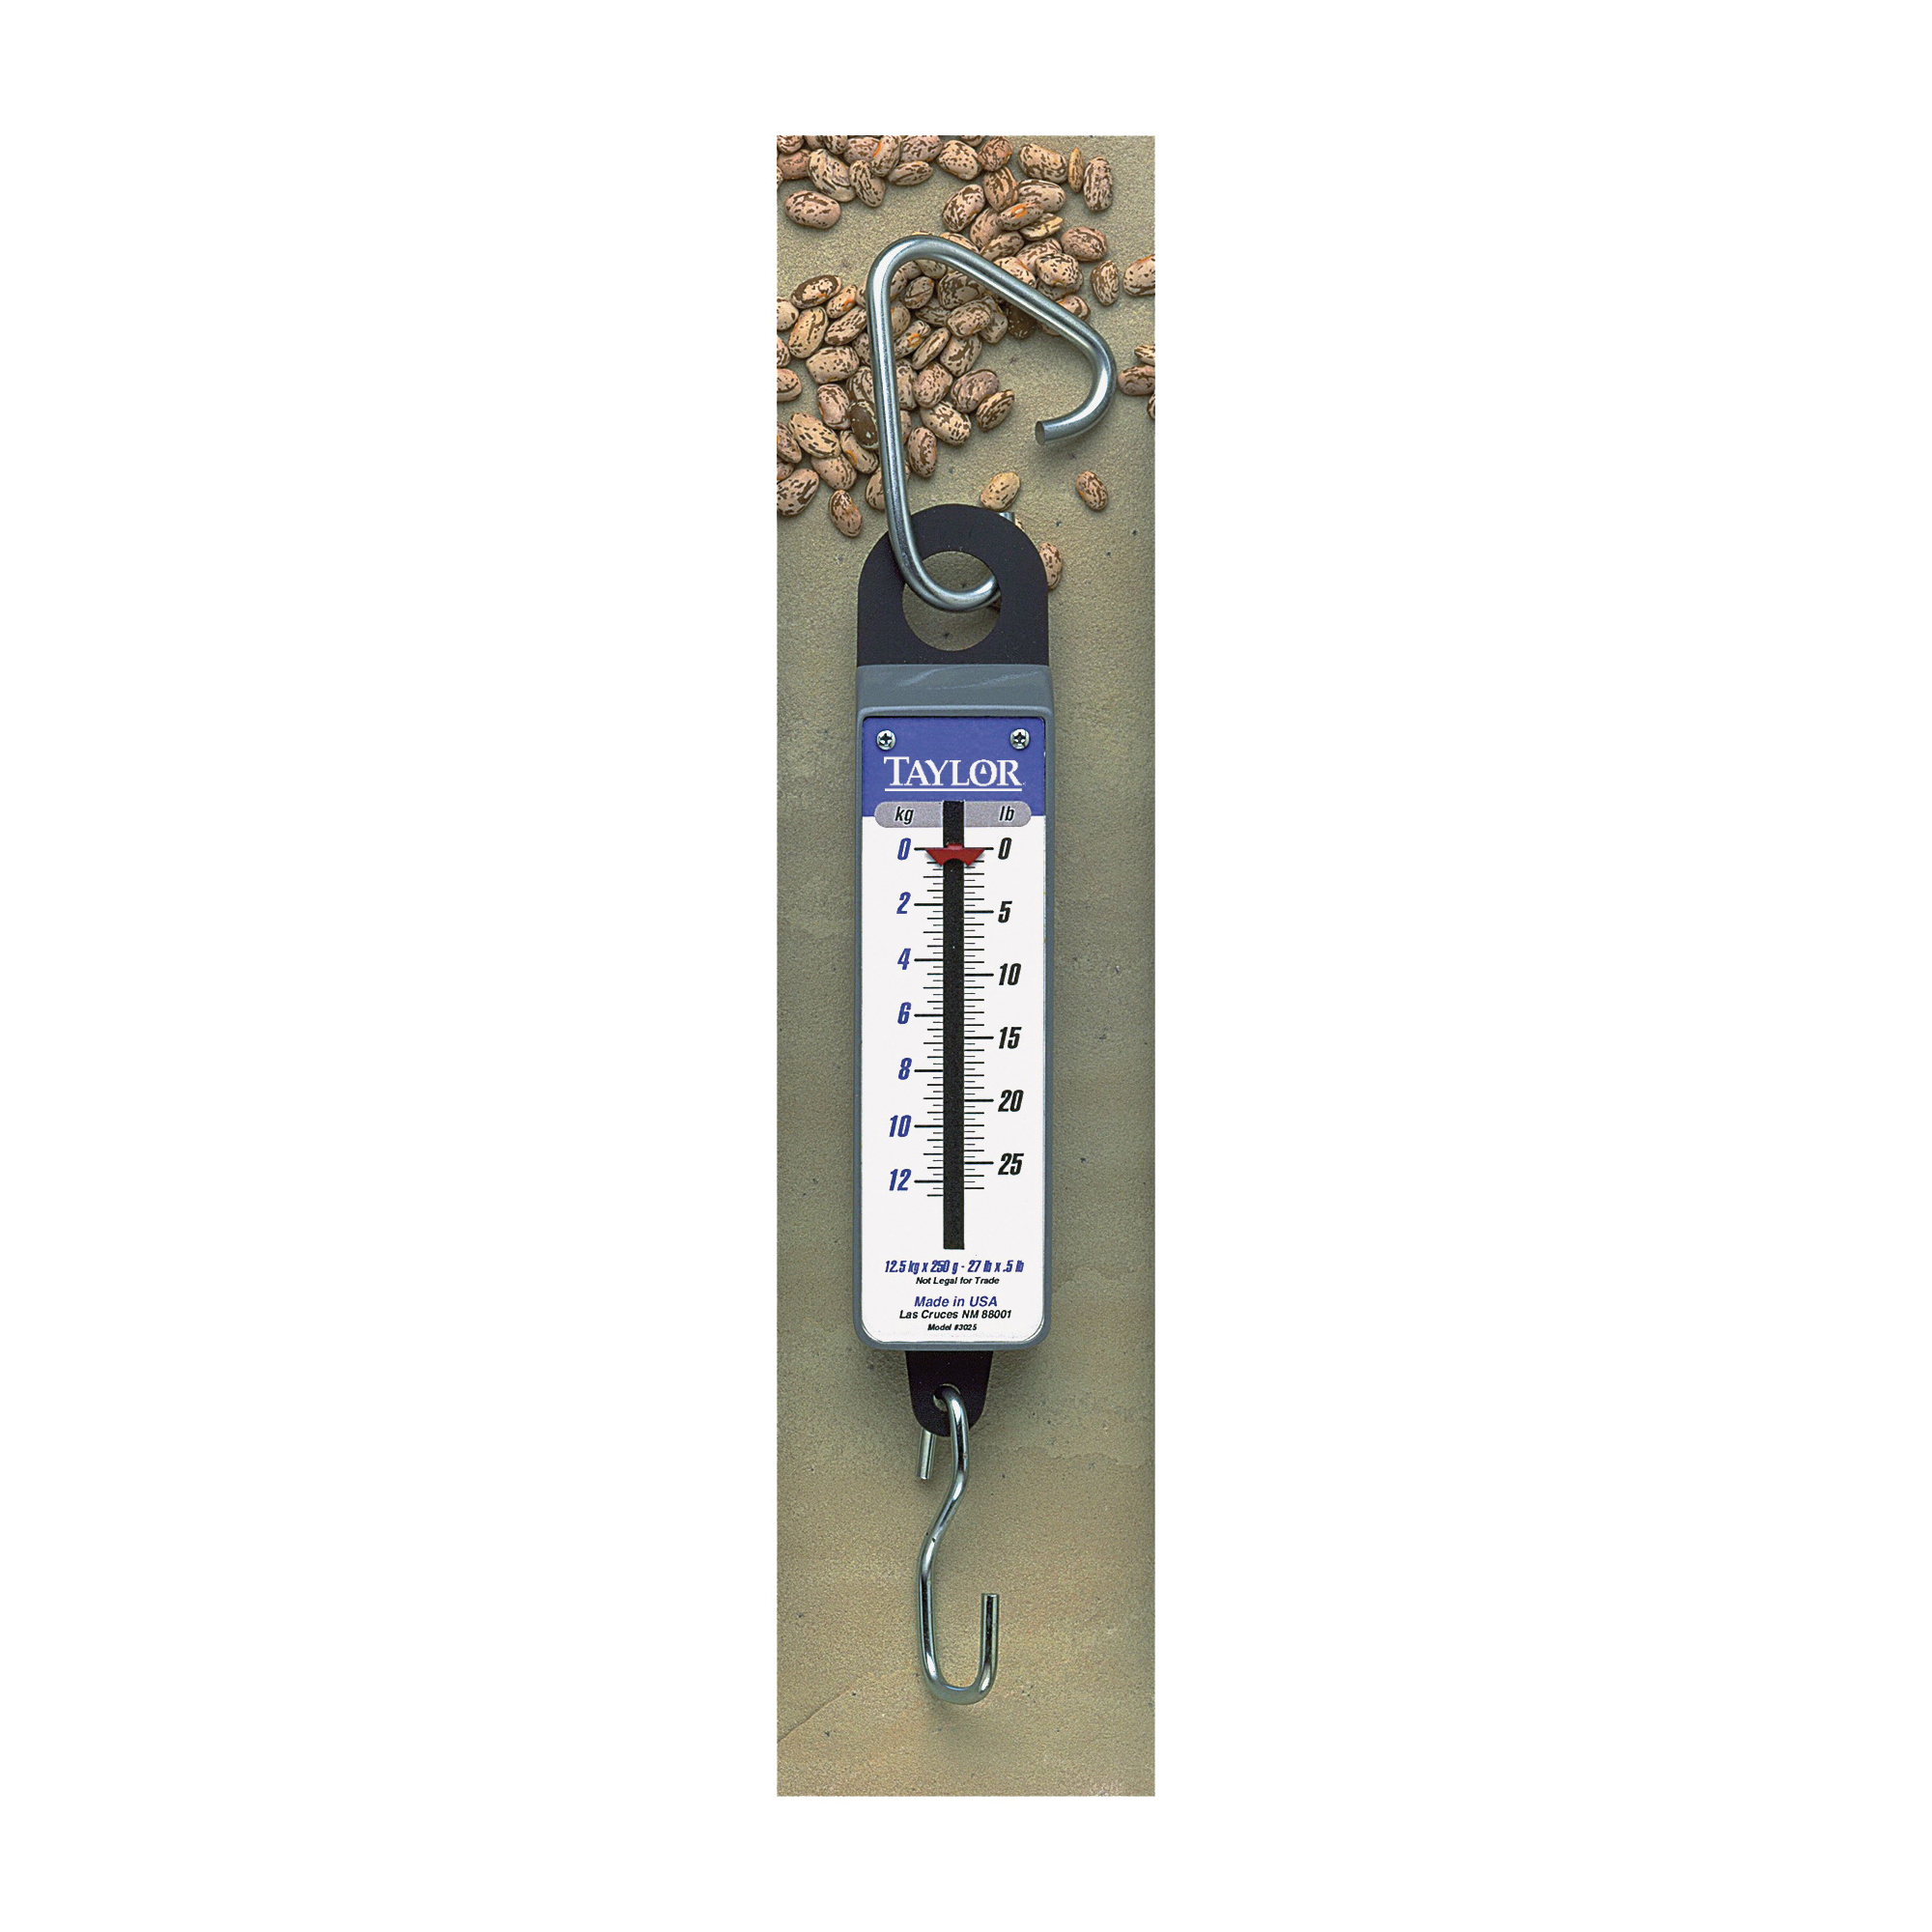 Taylor 3070 Hanging Scale, 70 lb Capacity, Analog Display, Steel Housing Material, lb - 1